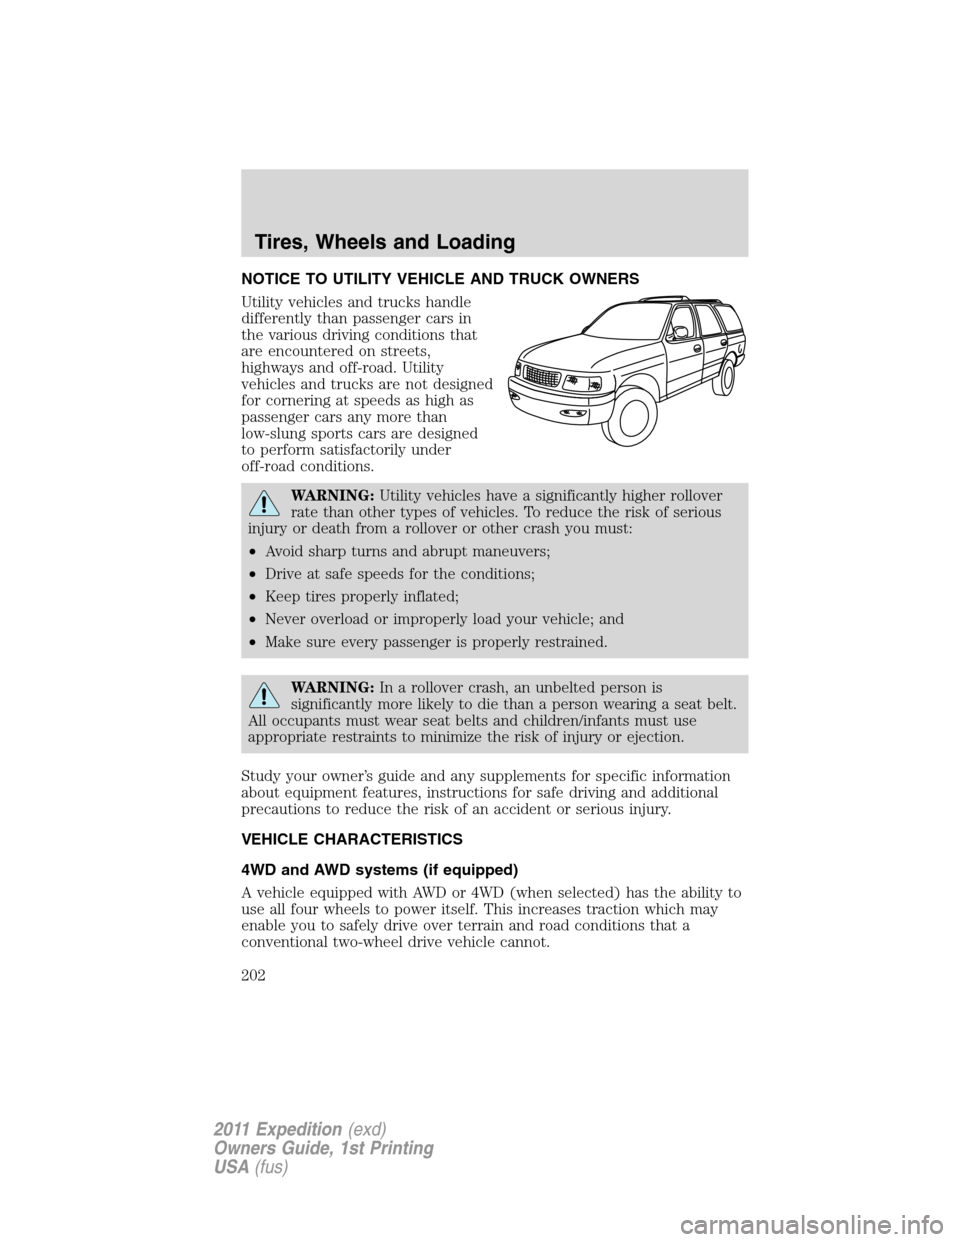 FORD EXPEDITION 2011 3.G Owners Manual NOTICE TO UTILITY VEHICLE AND TRUCK OWNERS
Utility vehicles and trucks handle
differently than passenger cars in
the various driving conditions that
are encountered on streets,
highways and off-road. 